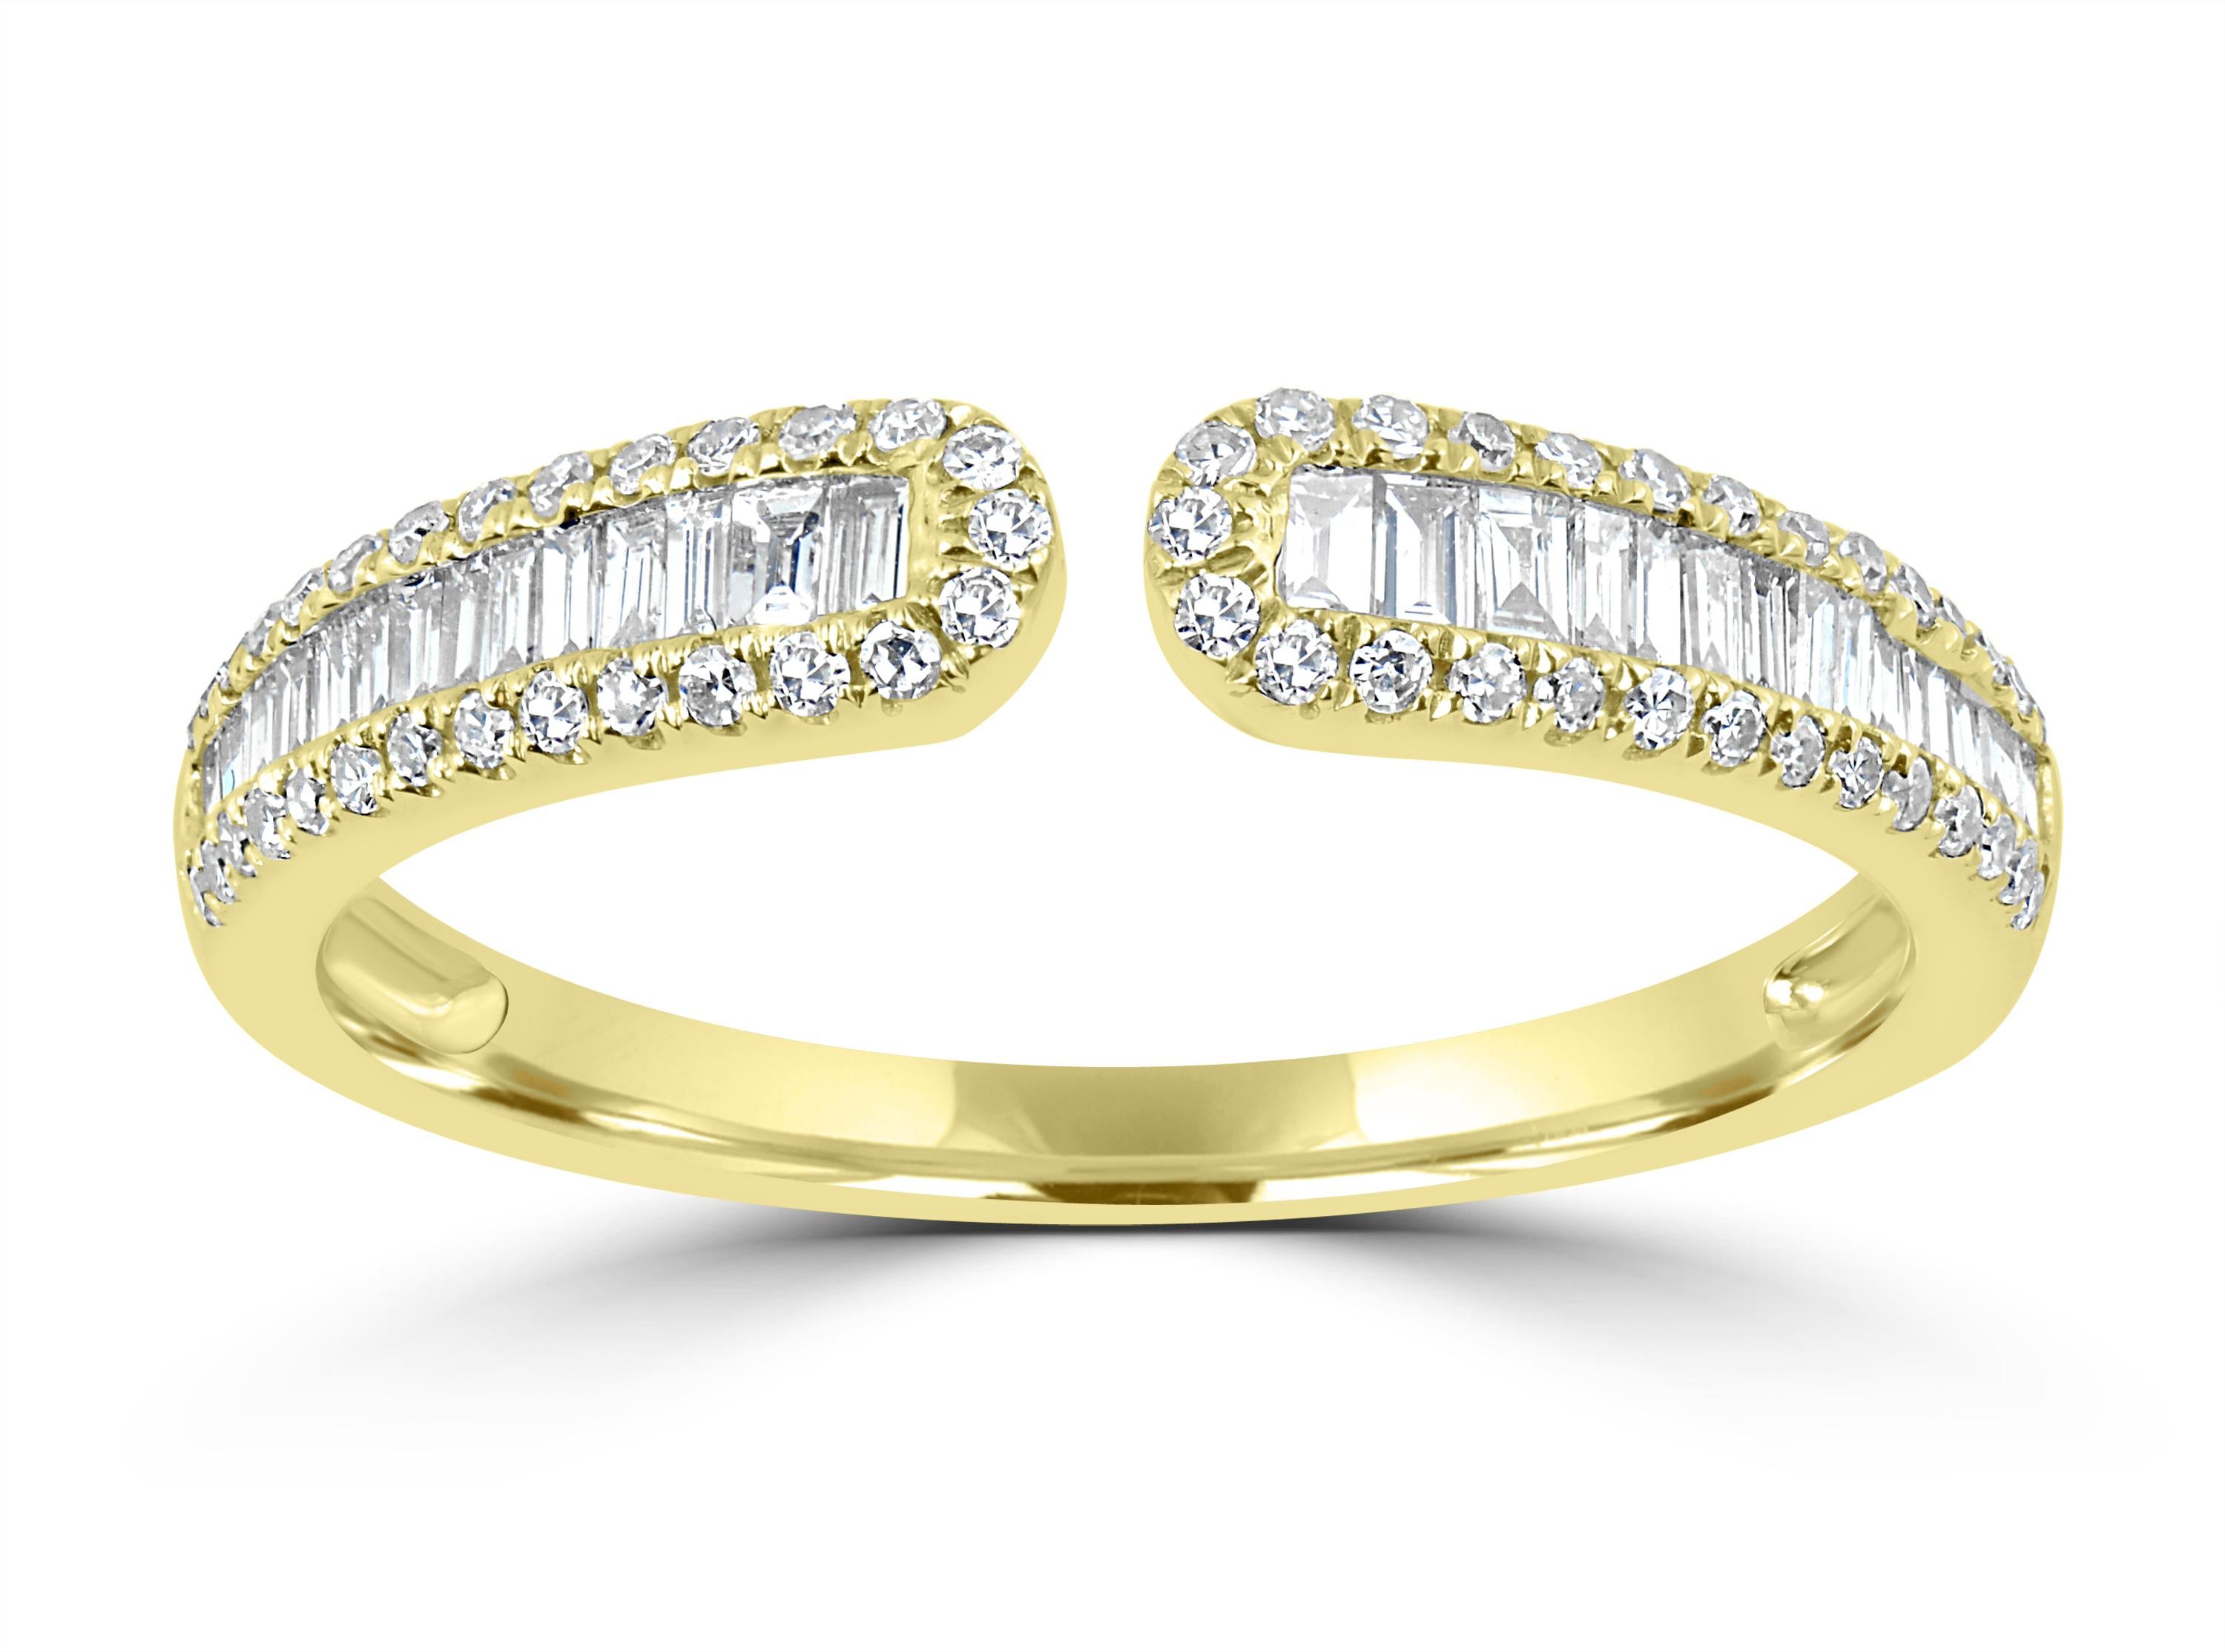 This ring is full of sparkle and style. Crafted in 18K yellow gold it consists of 26 baguette diamonds and 58 round diamonds.

JEWELRY SPECIFICATION:
Approx. Gold Weight: 2.29 gram
Approx. Diamond Weight: 0.31 Cts
Diamond Shape: Baguette/